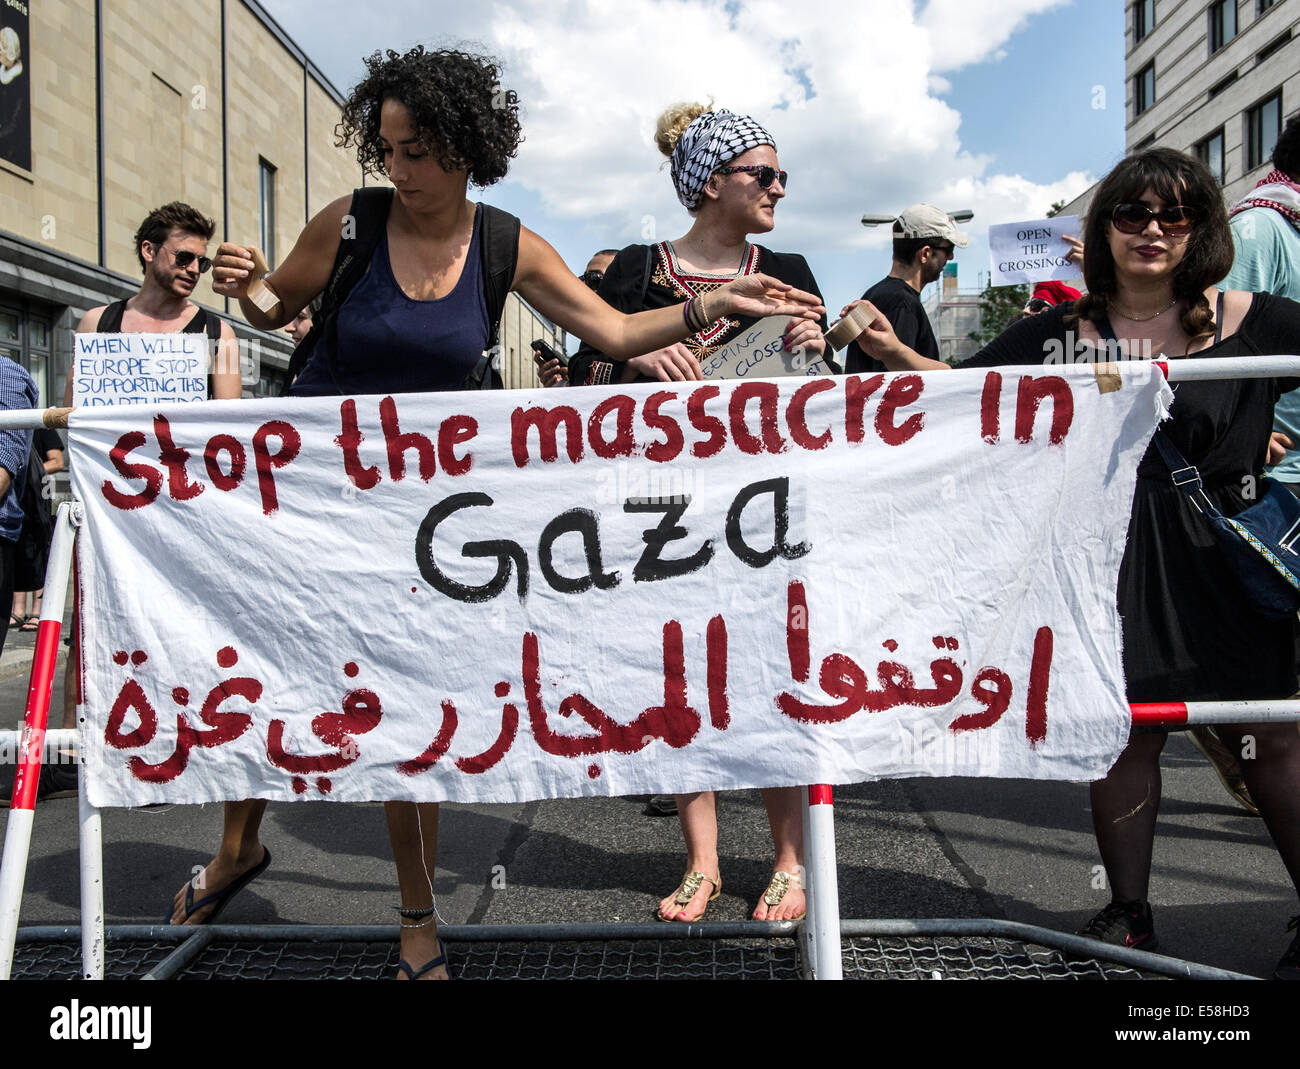 Berlin, Germany. 23rd July, 2014. Demonstrators with a banner reading 'Stop the massacre in Gaza' protest against the closing of the border to the Gaza Strip by Egypt at the Egyptian embassy in Berlin, Germany, 23 July 2014. Photo: Paul Zinken/dpa/Alamy Live News Stock Photo